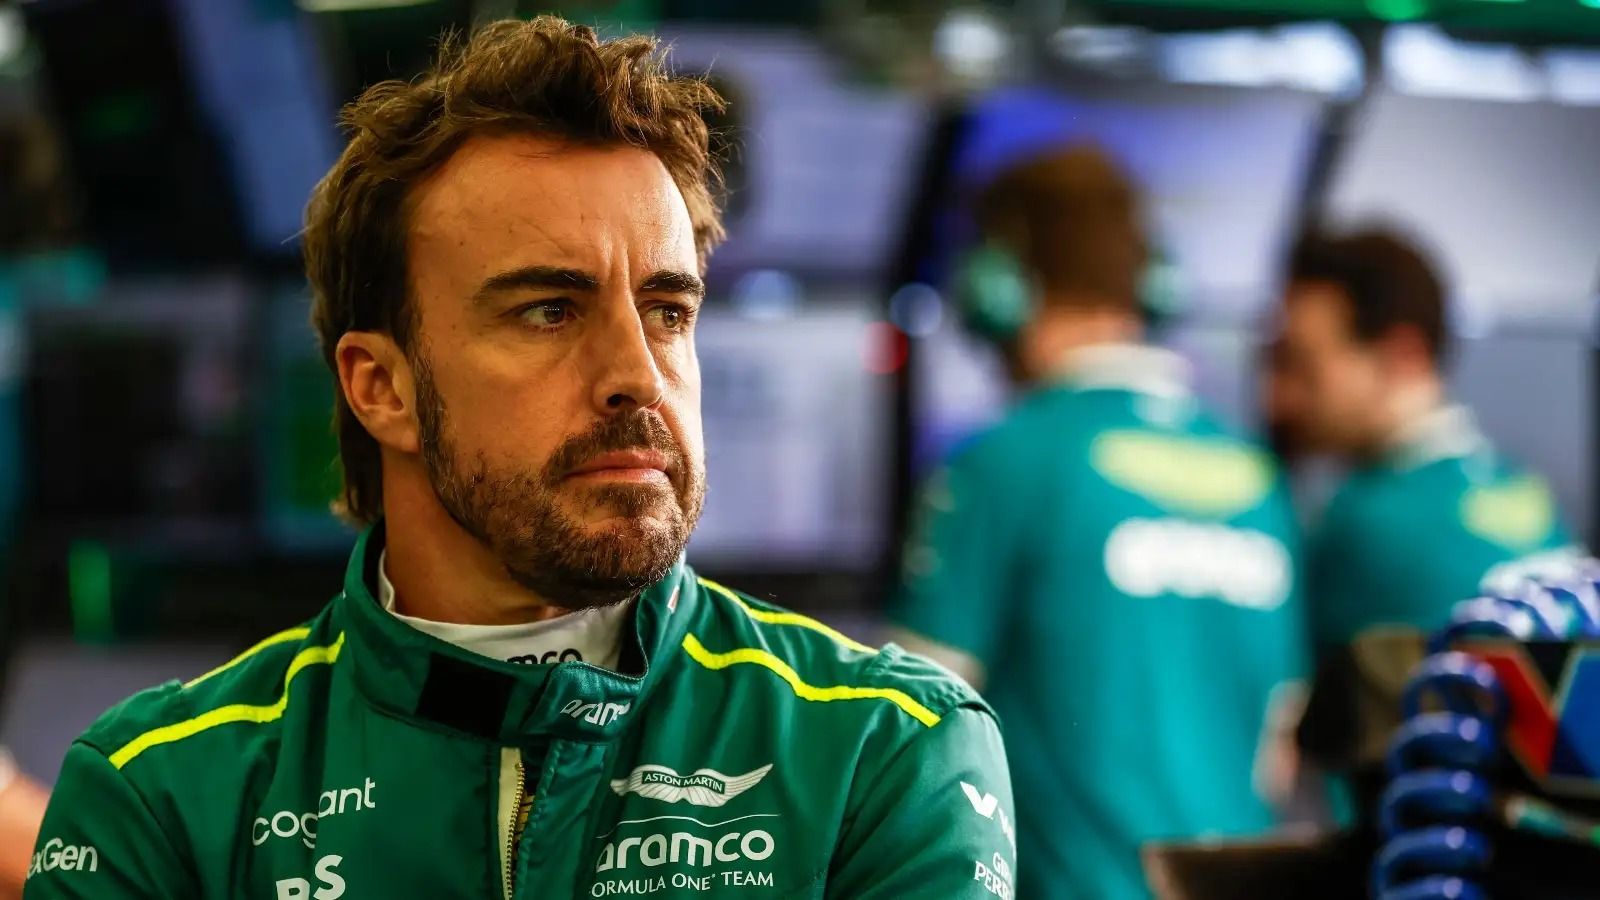 Fernando Alonso Reacts To Crash With Russell's Car At Australian Grand Prix